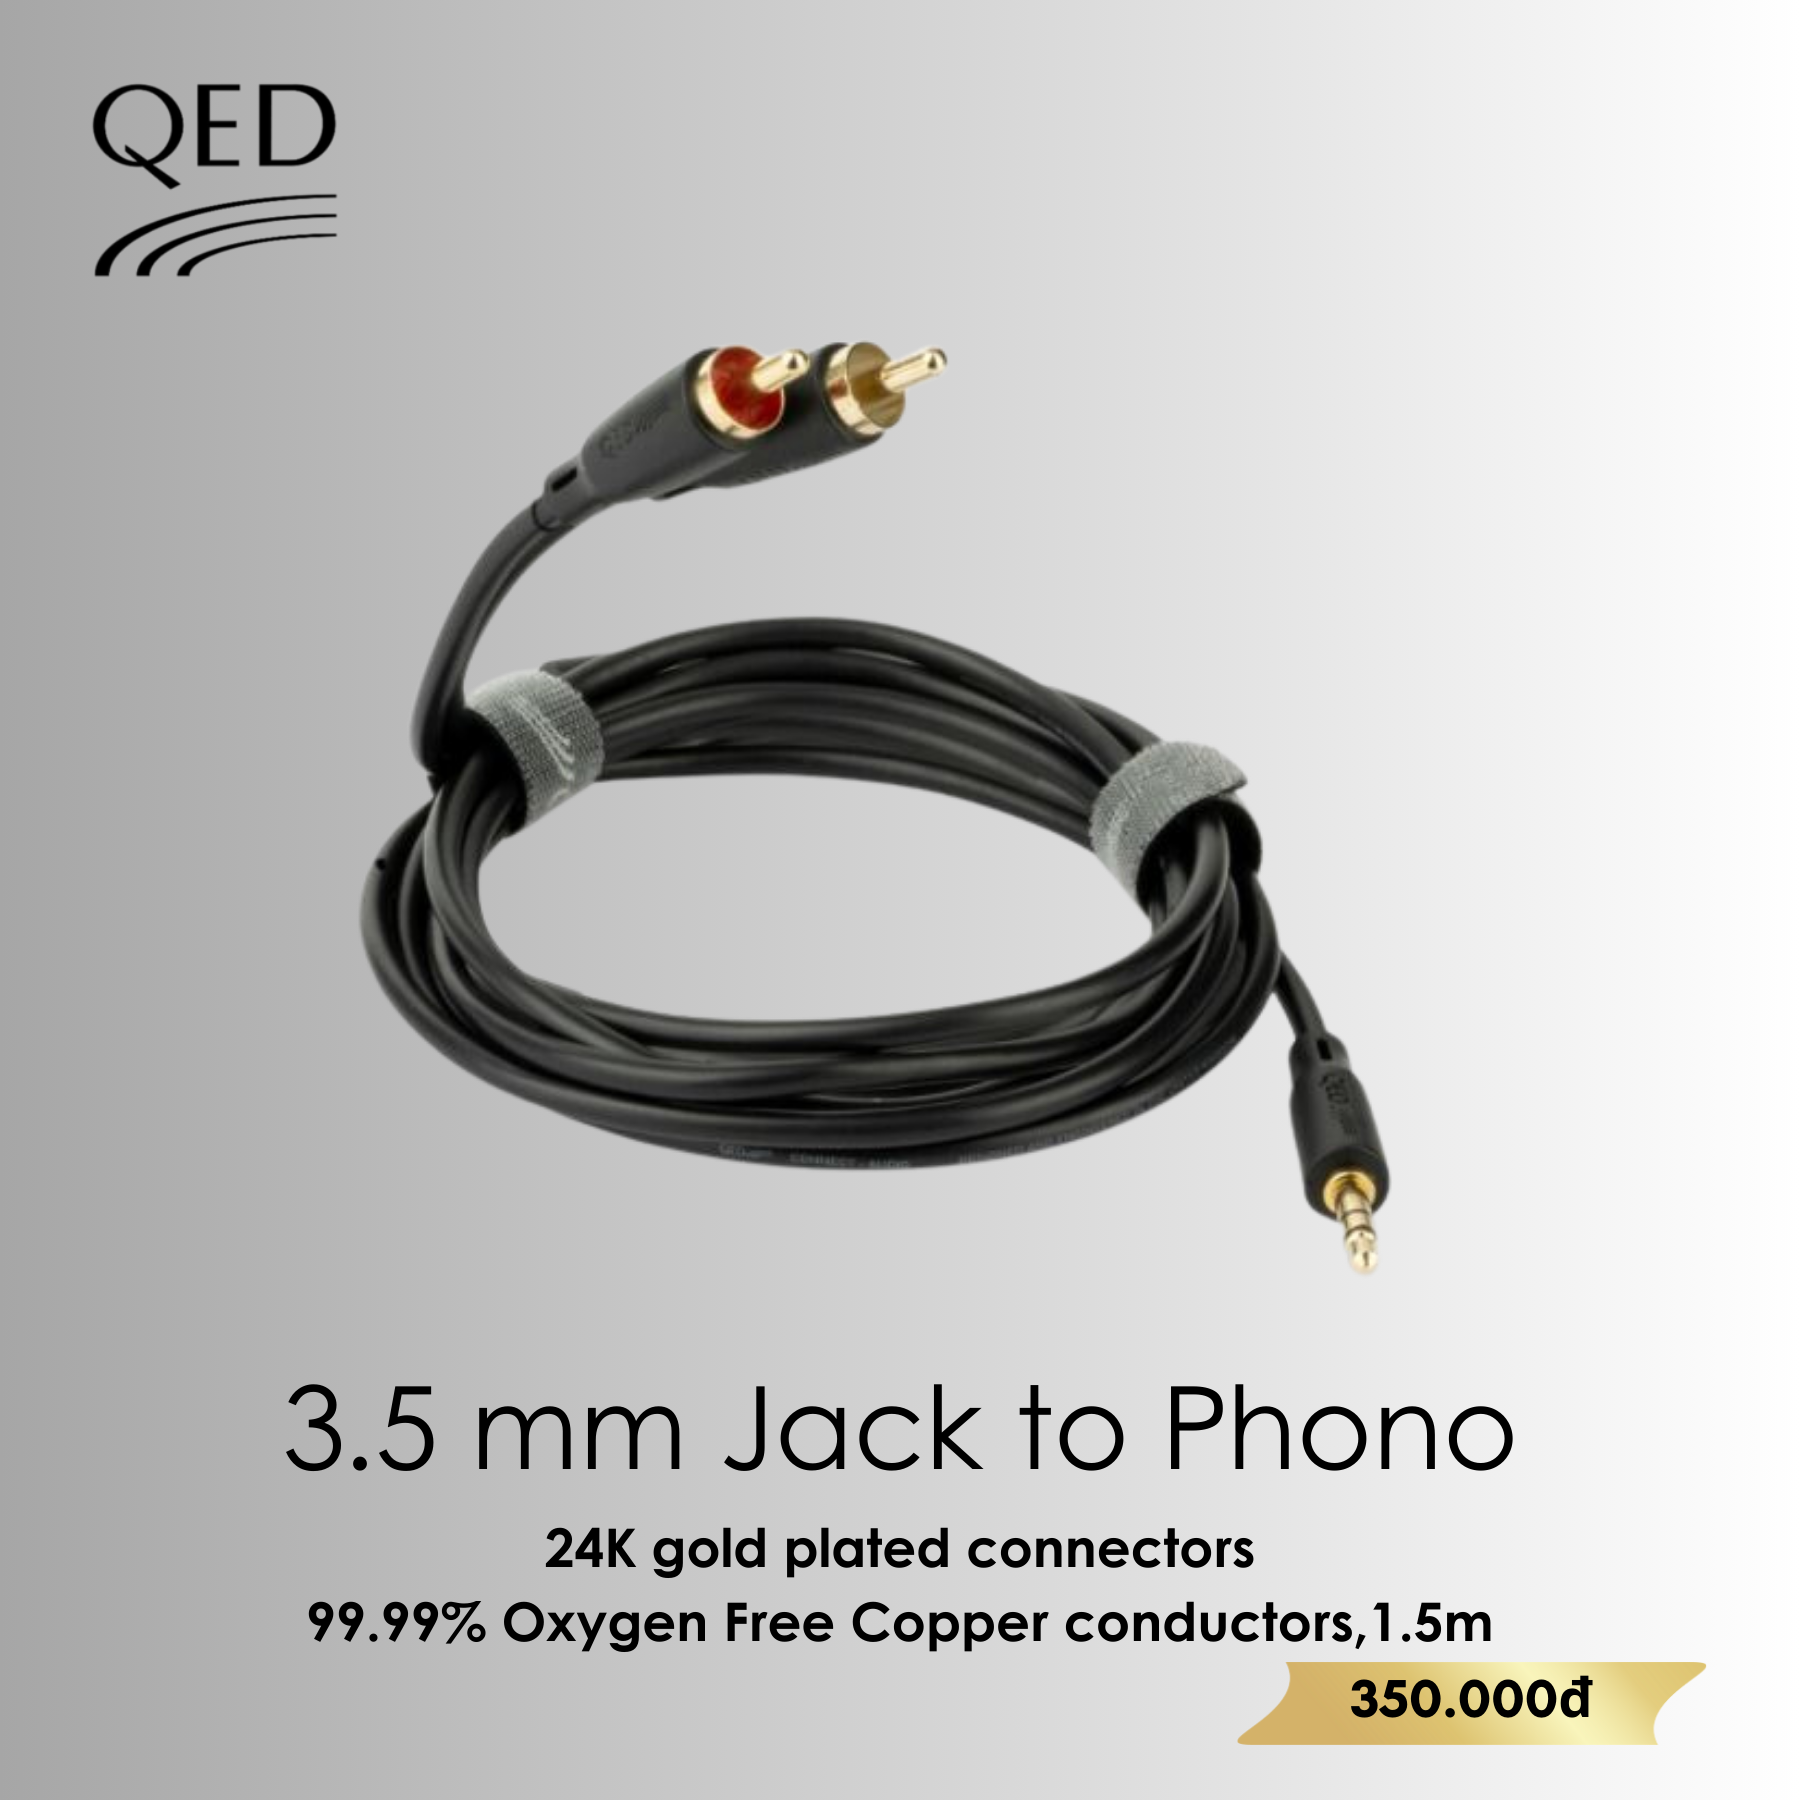 3.5 mm Jack to Phono